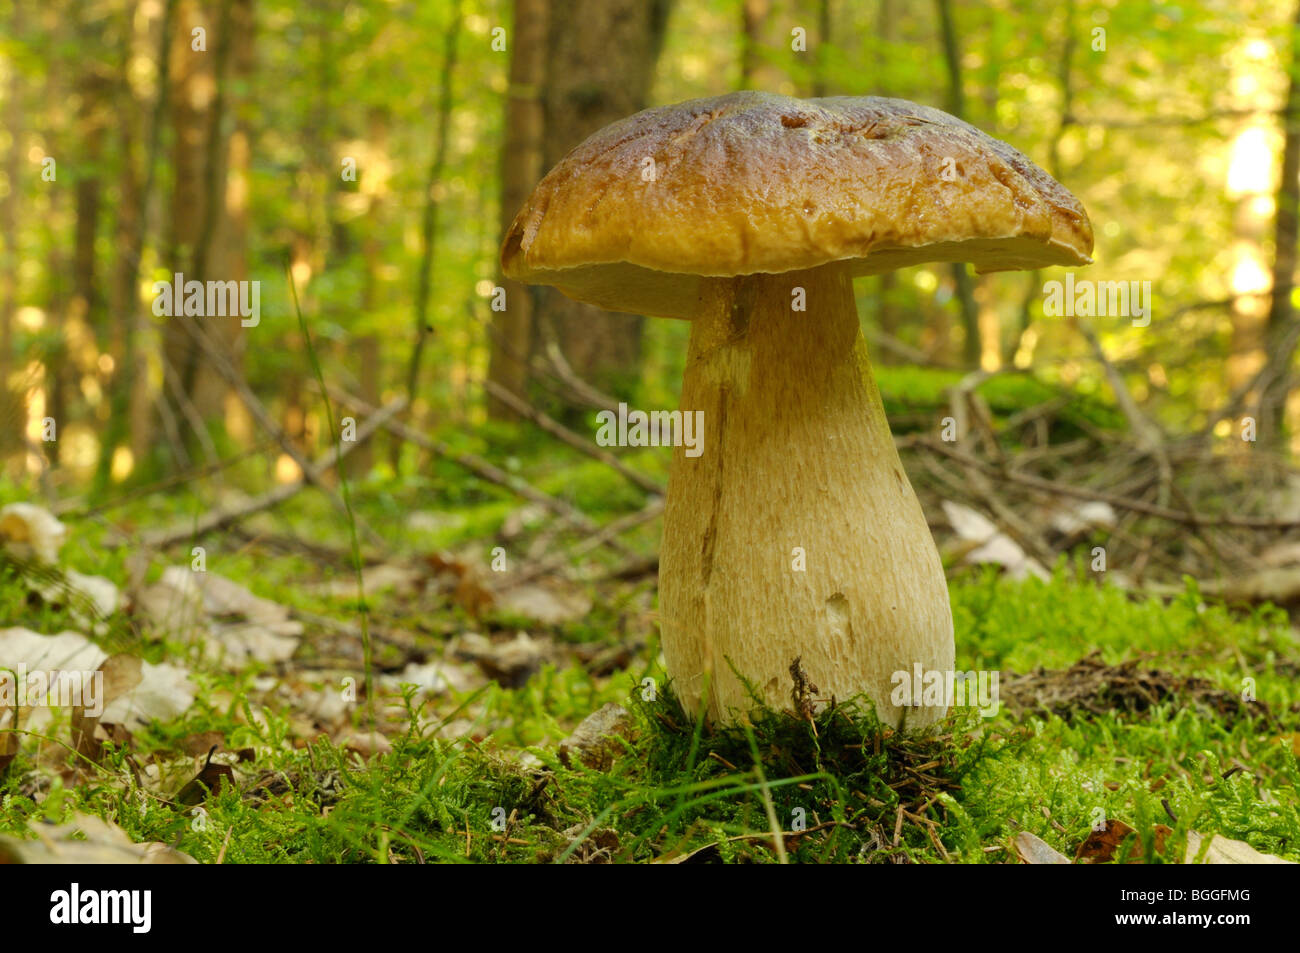 Cep (Boletus edulis) growing in forest, Bavaria, Germany, surface level, close-up Stock Photo